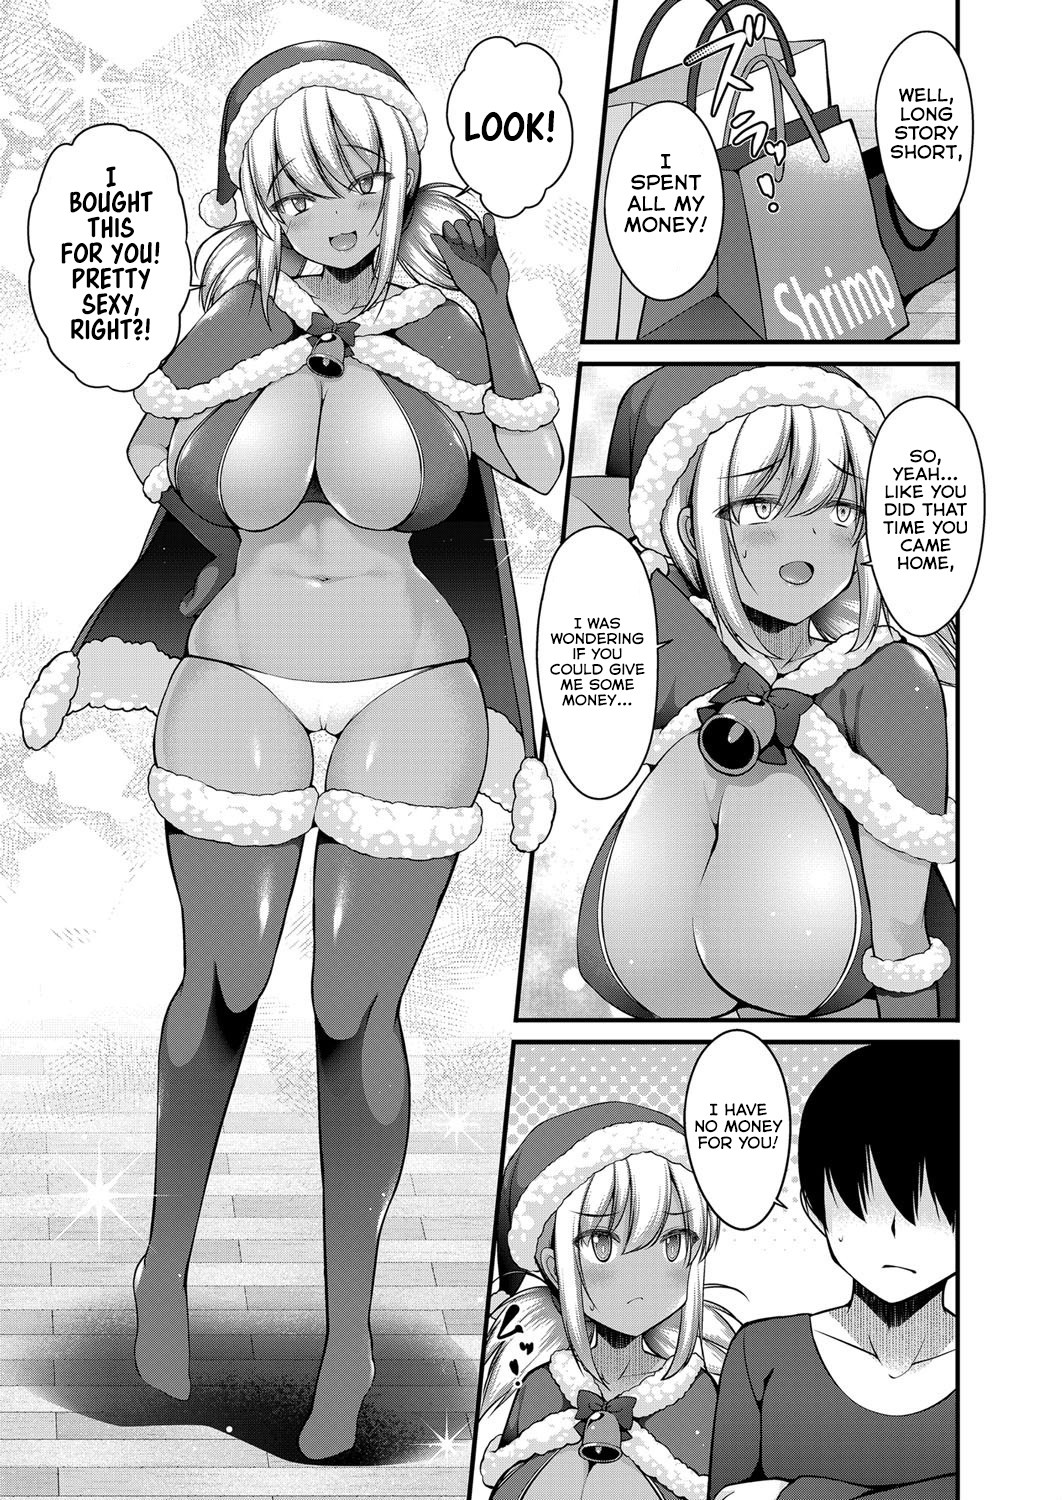 Hentai Manga Comic-A Story About When My Big Breasted Little Sister Visited Me From The Country In a Sex Santa Outfit-Read-3